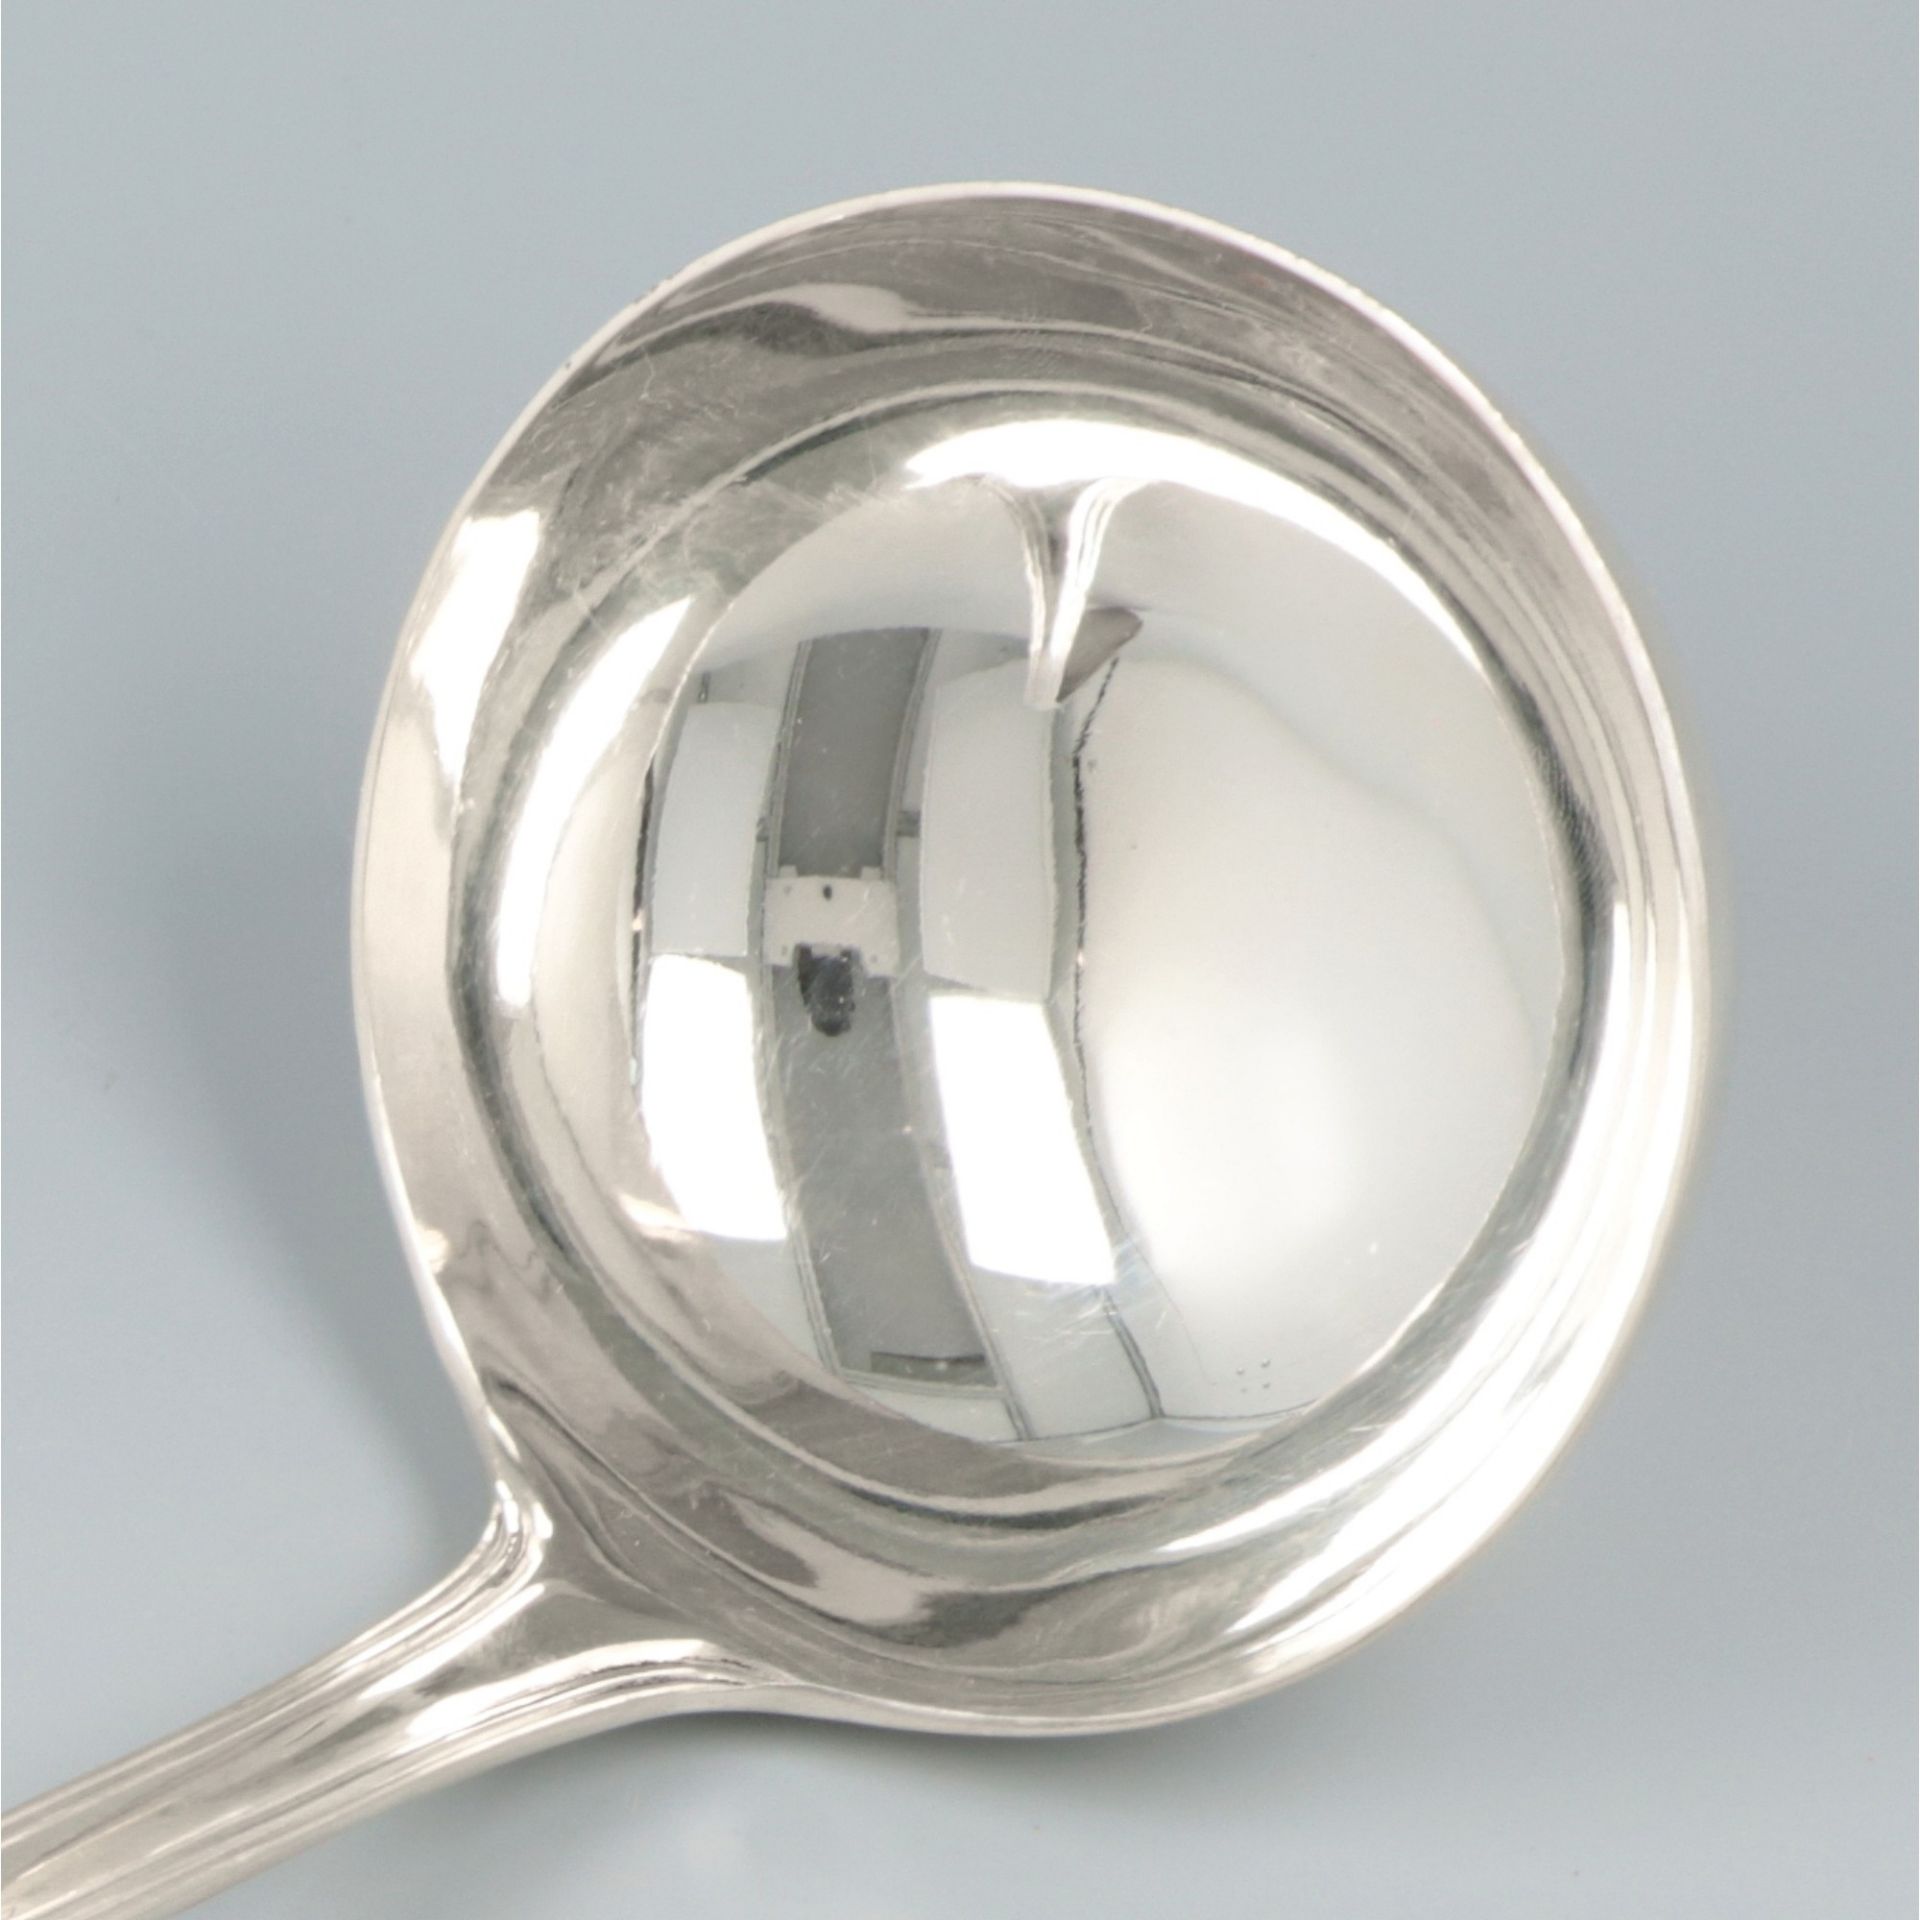 Soup spoon, silver. - Image 4 of 6